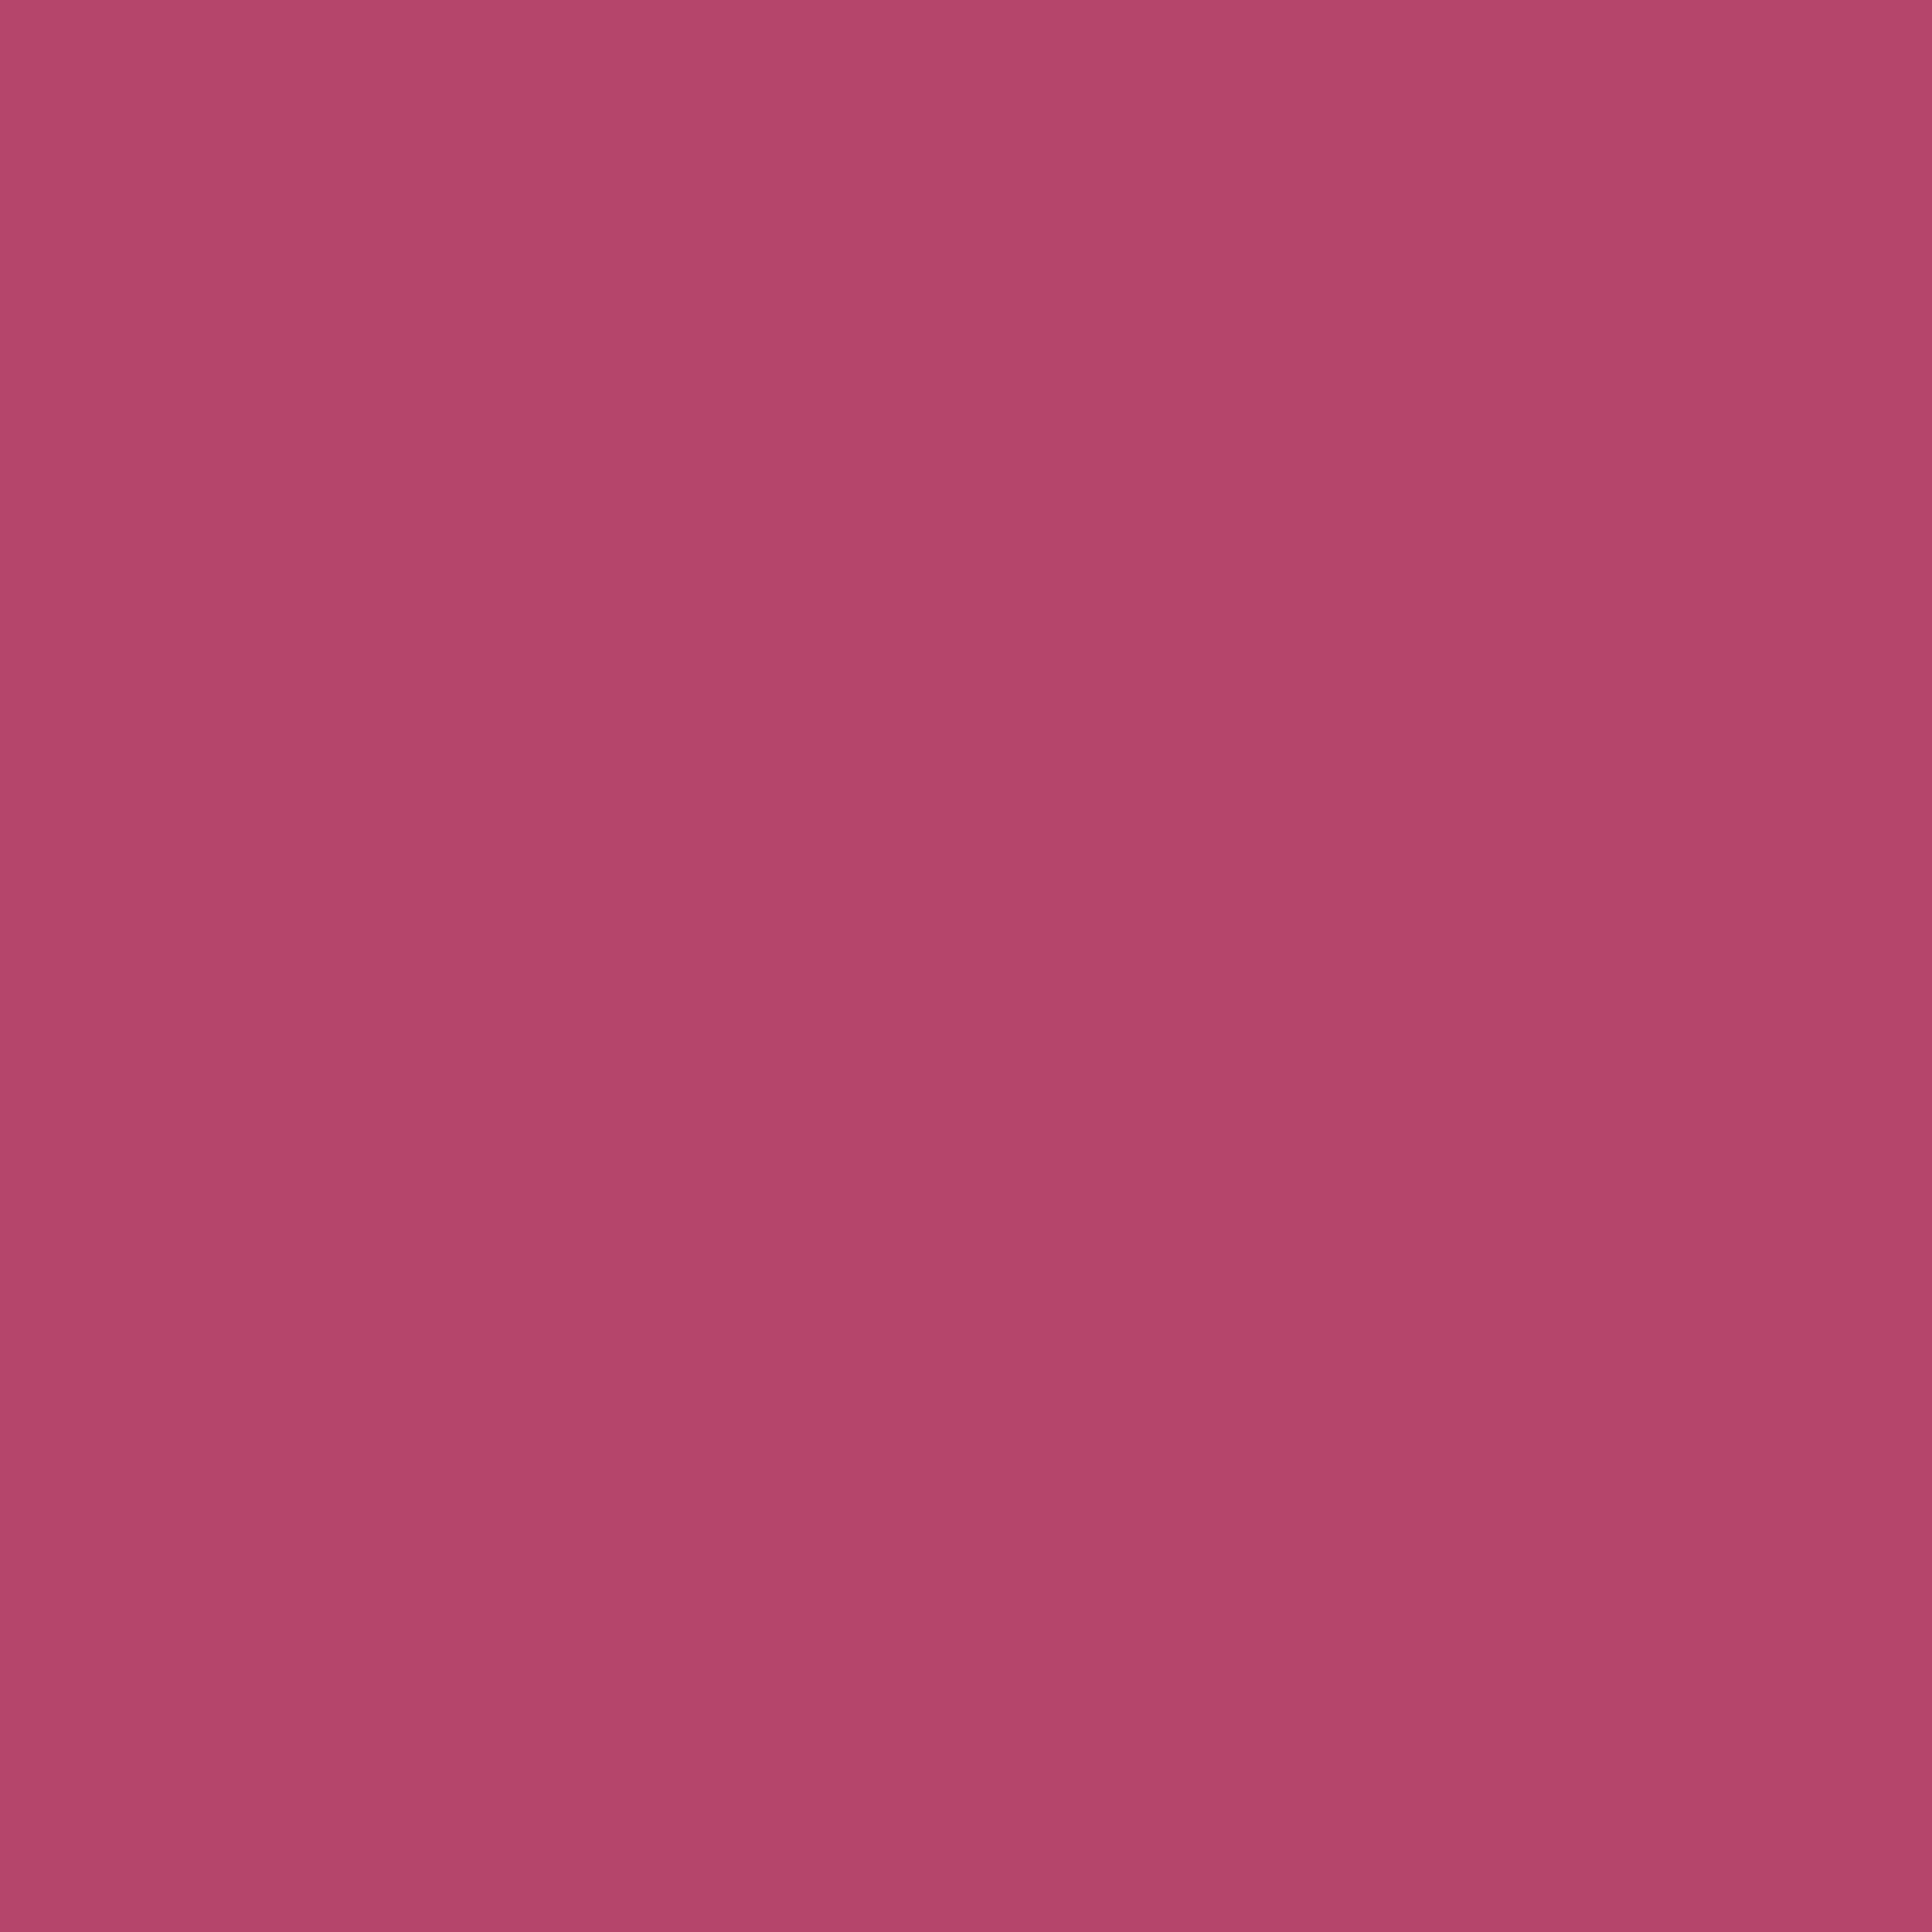 3600x3600 Raspberry Rose Solid Color Background